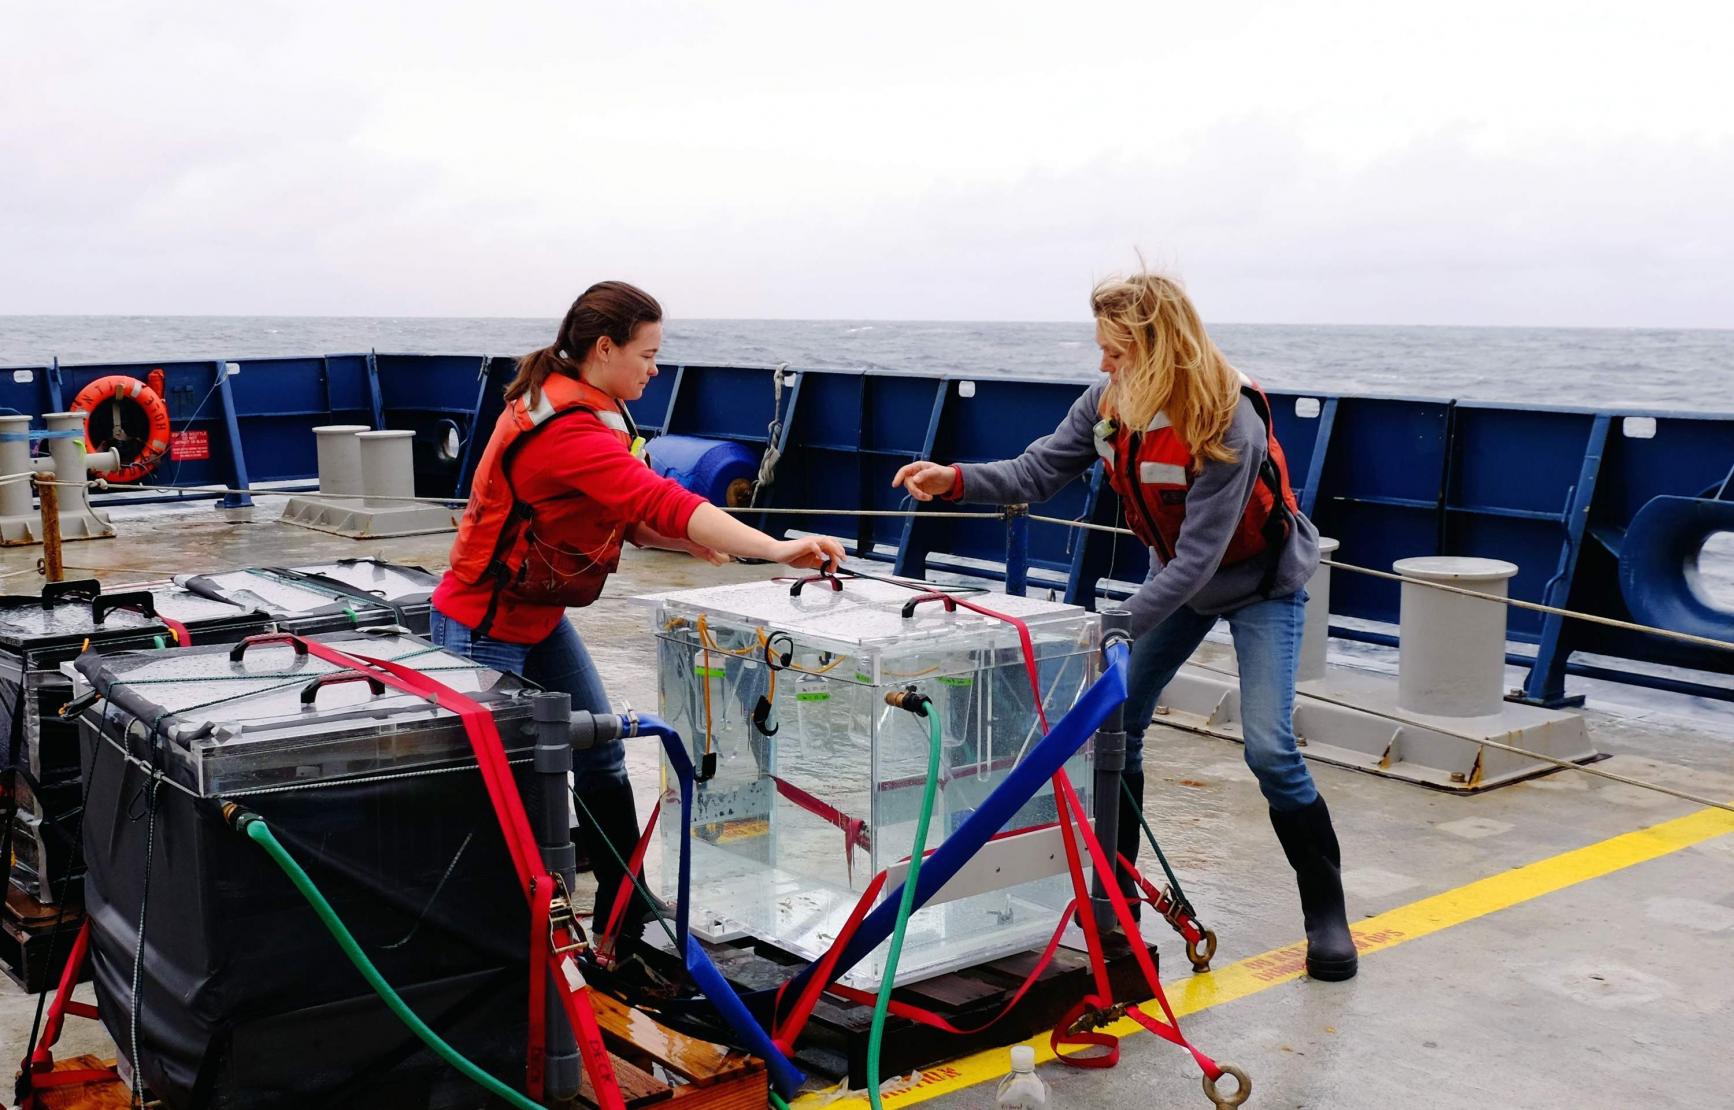 Two scientists on board a boat at sea